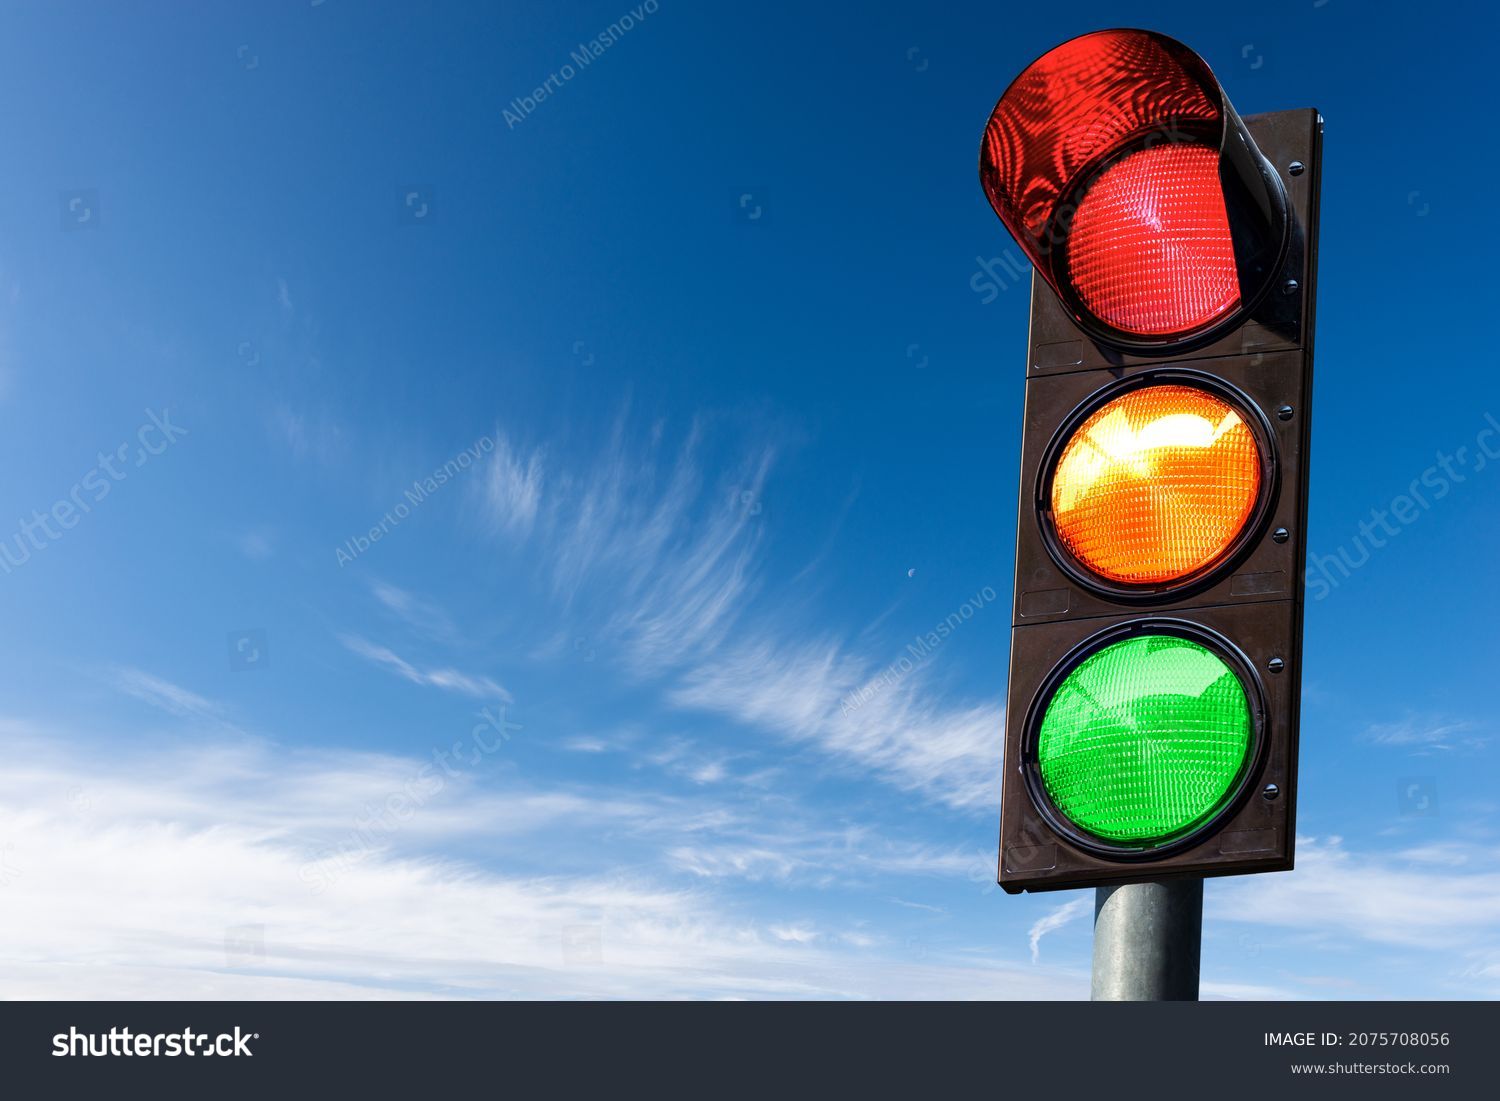 Closeup of a traffic light on a blue sky with clouds and copy space, with all three lights on, green, orange and red. Italy, Europe. #2075708056